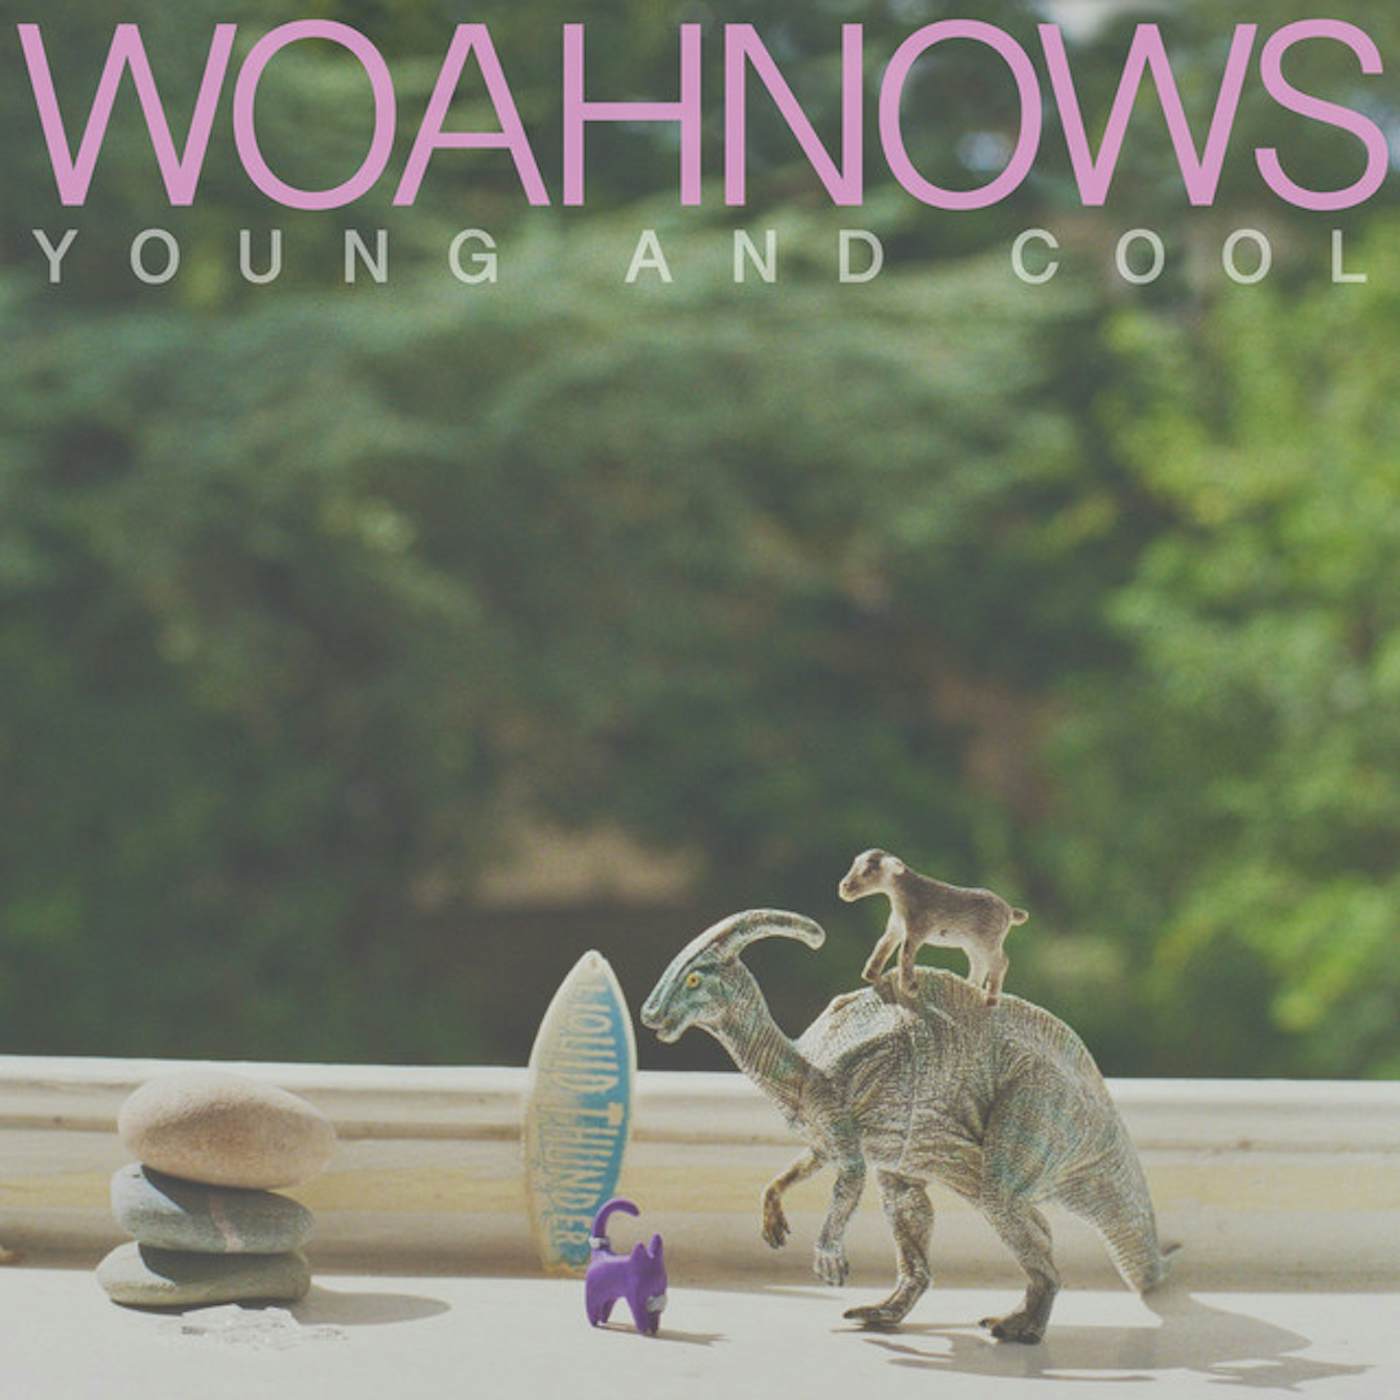 Woahnows Young and Cool Vinyl Record